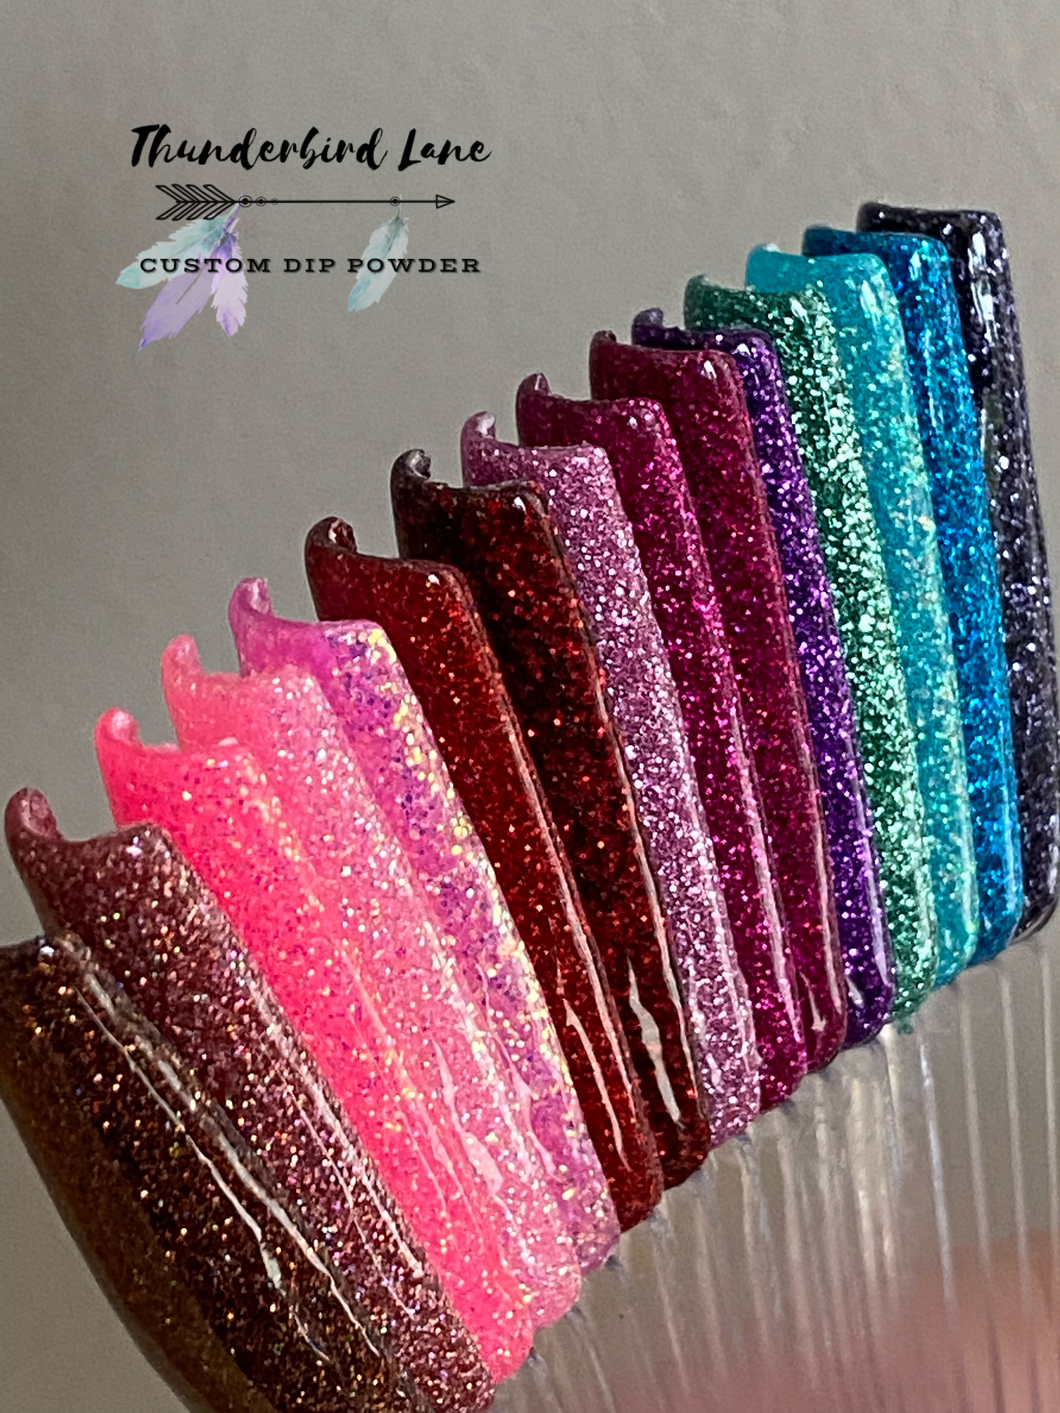 Rainbow Glitter Club Bundles: $25 for 6, $50 for 12, or $75 for 18